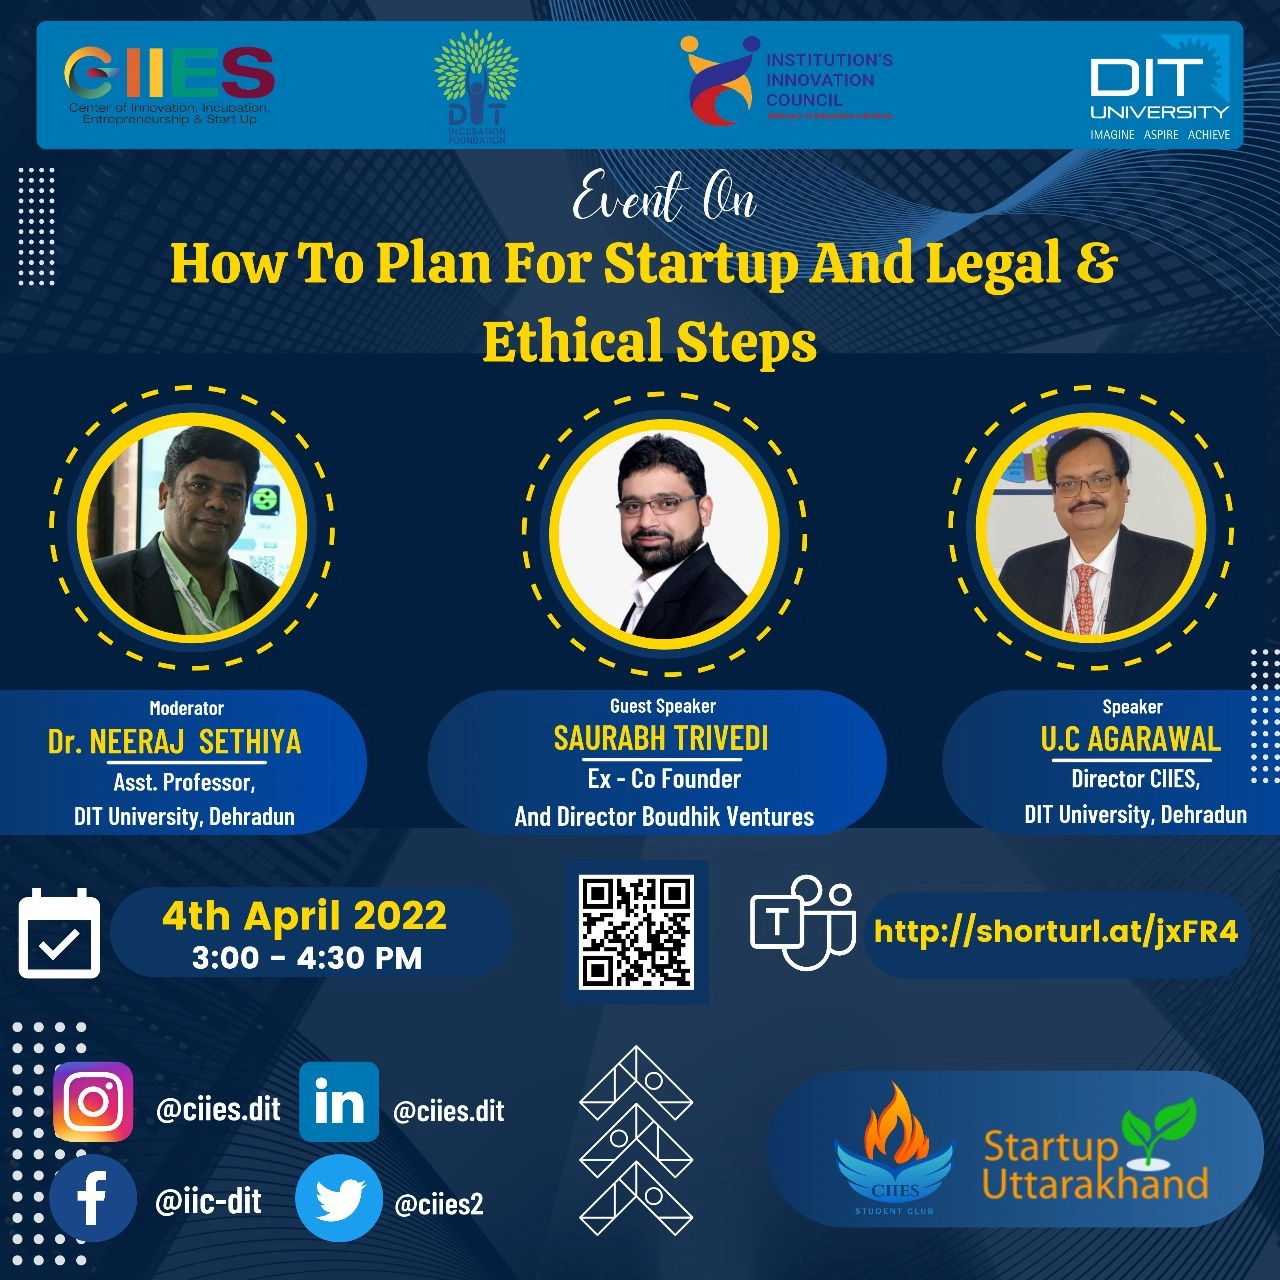 How To Plan For Startup And Legal & Ethical Steps